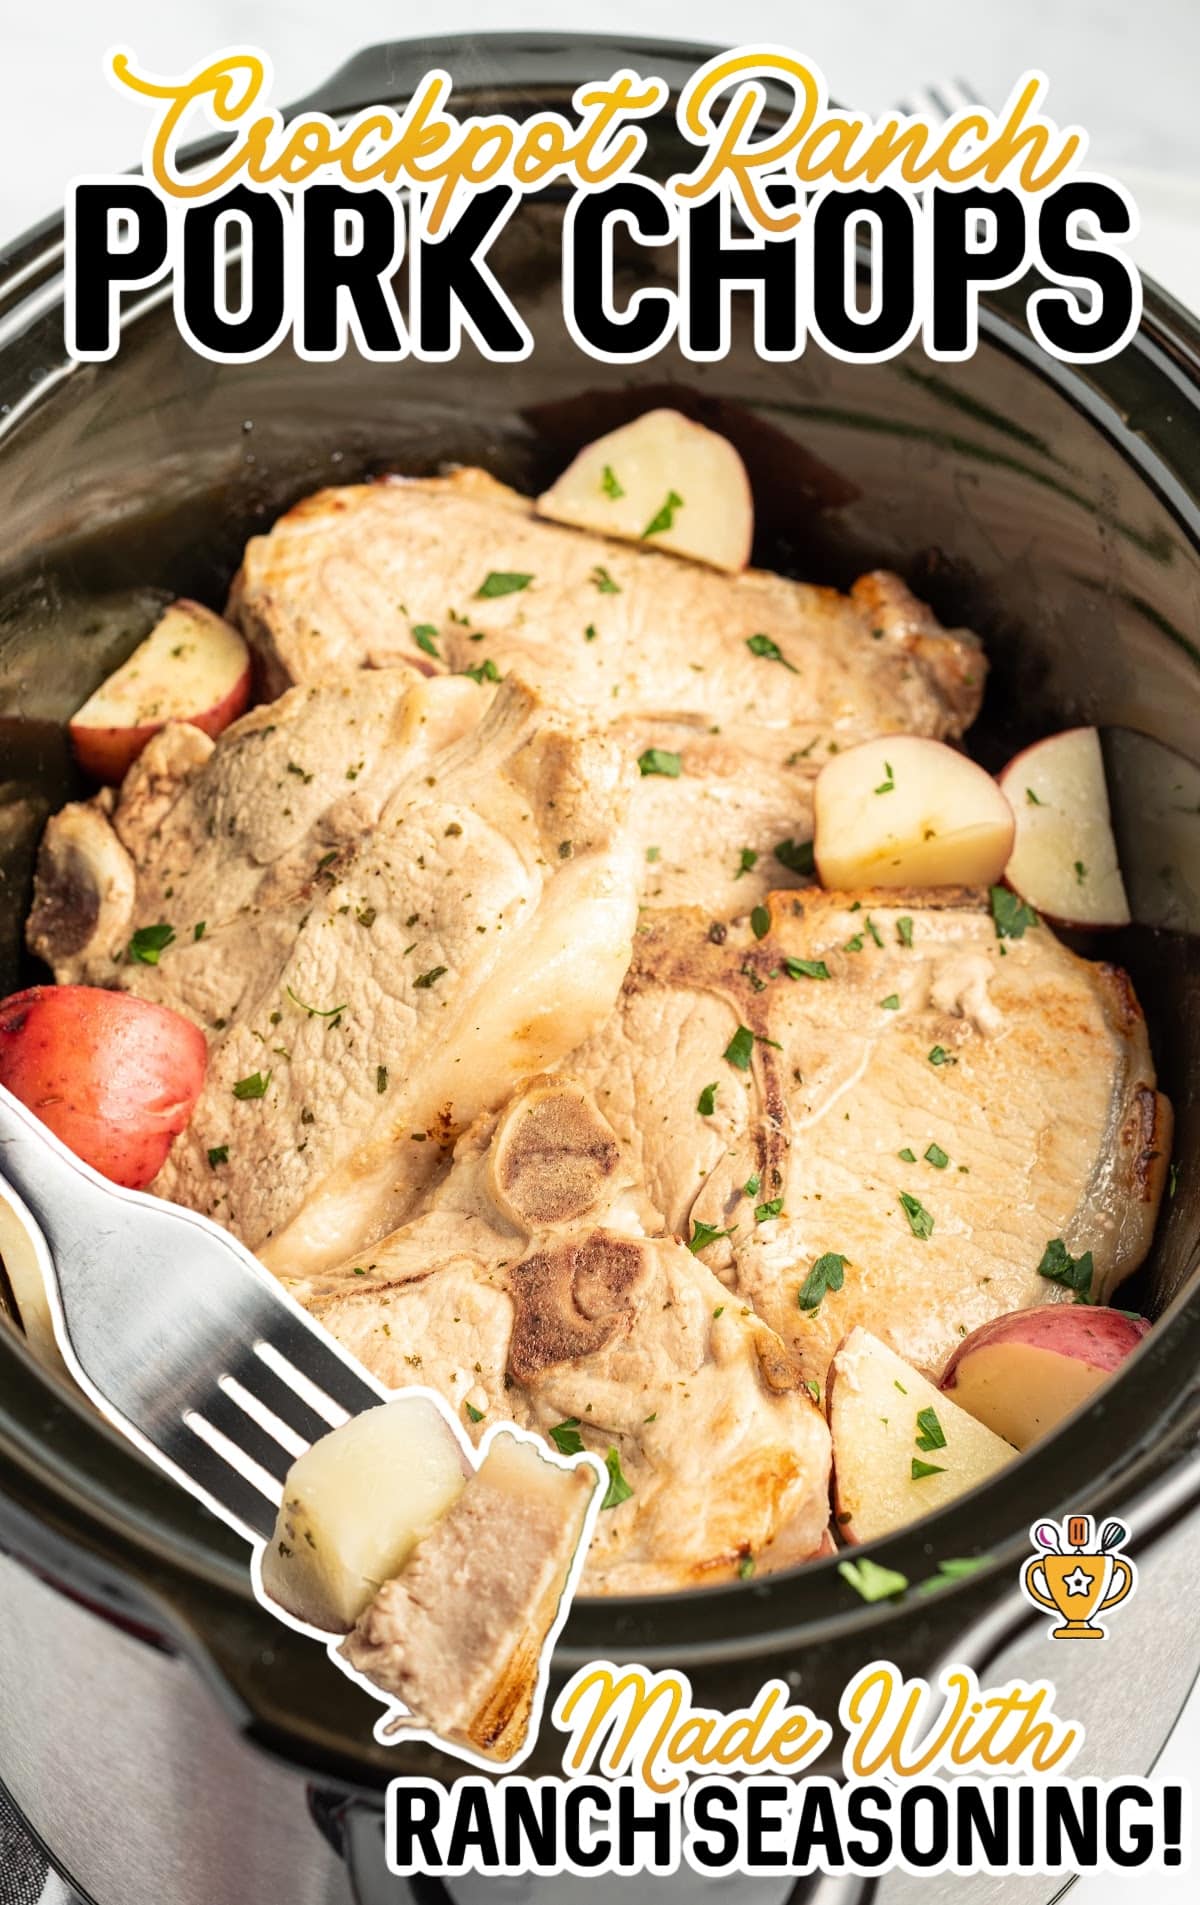 crockpot full of pork chops and diced red potatoes